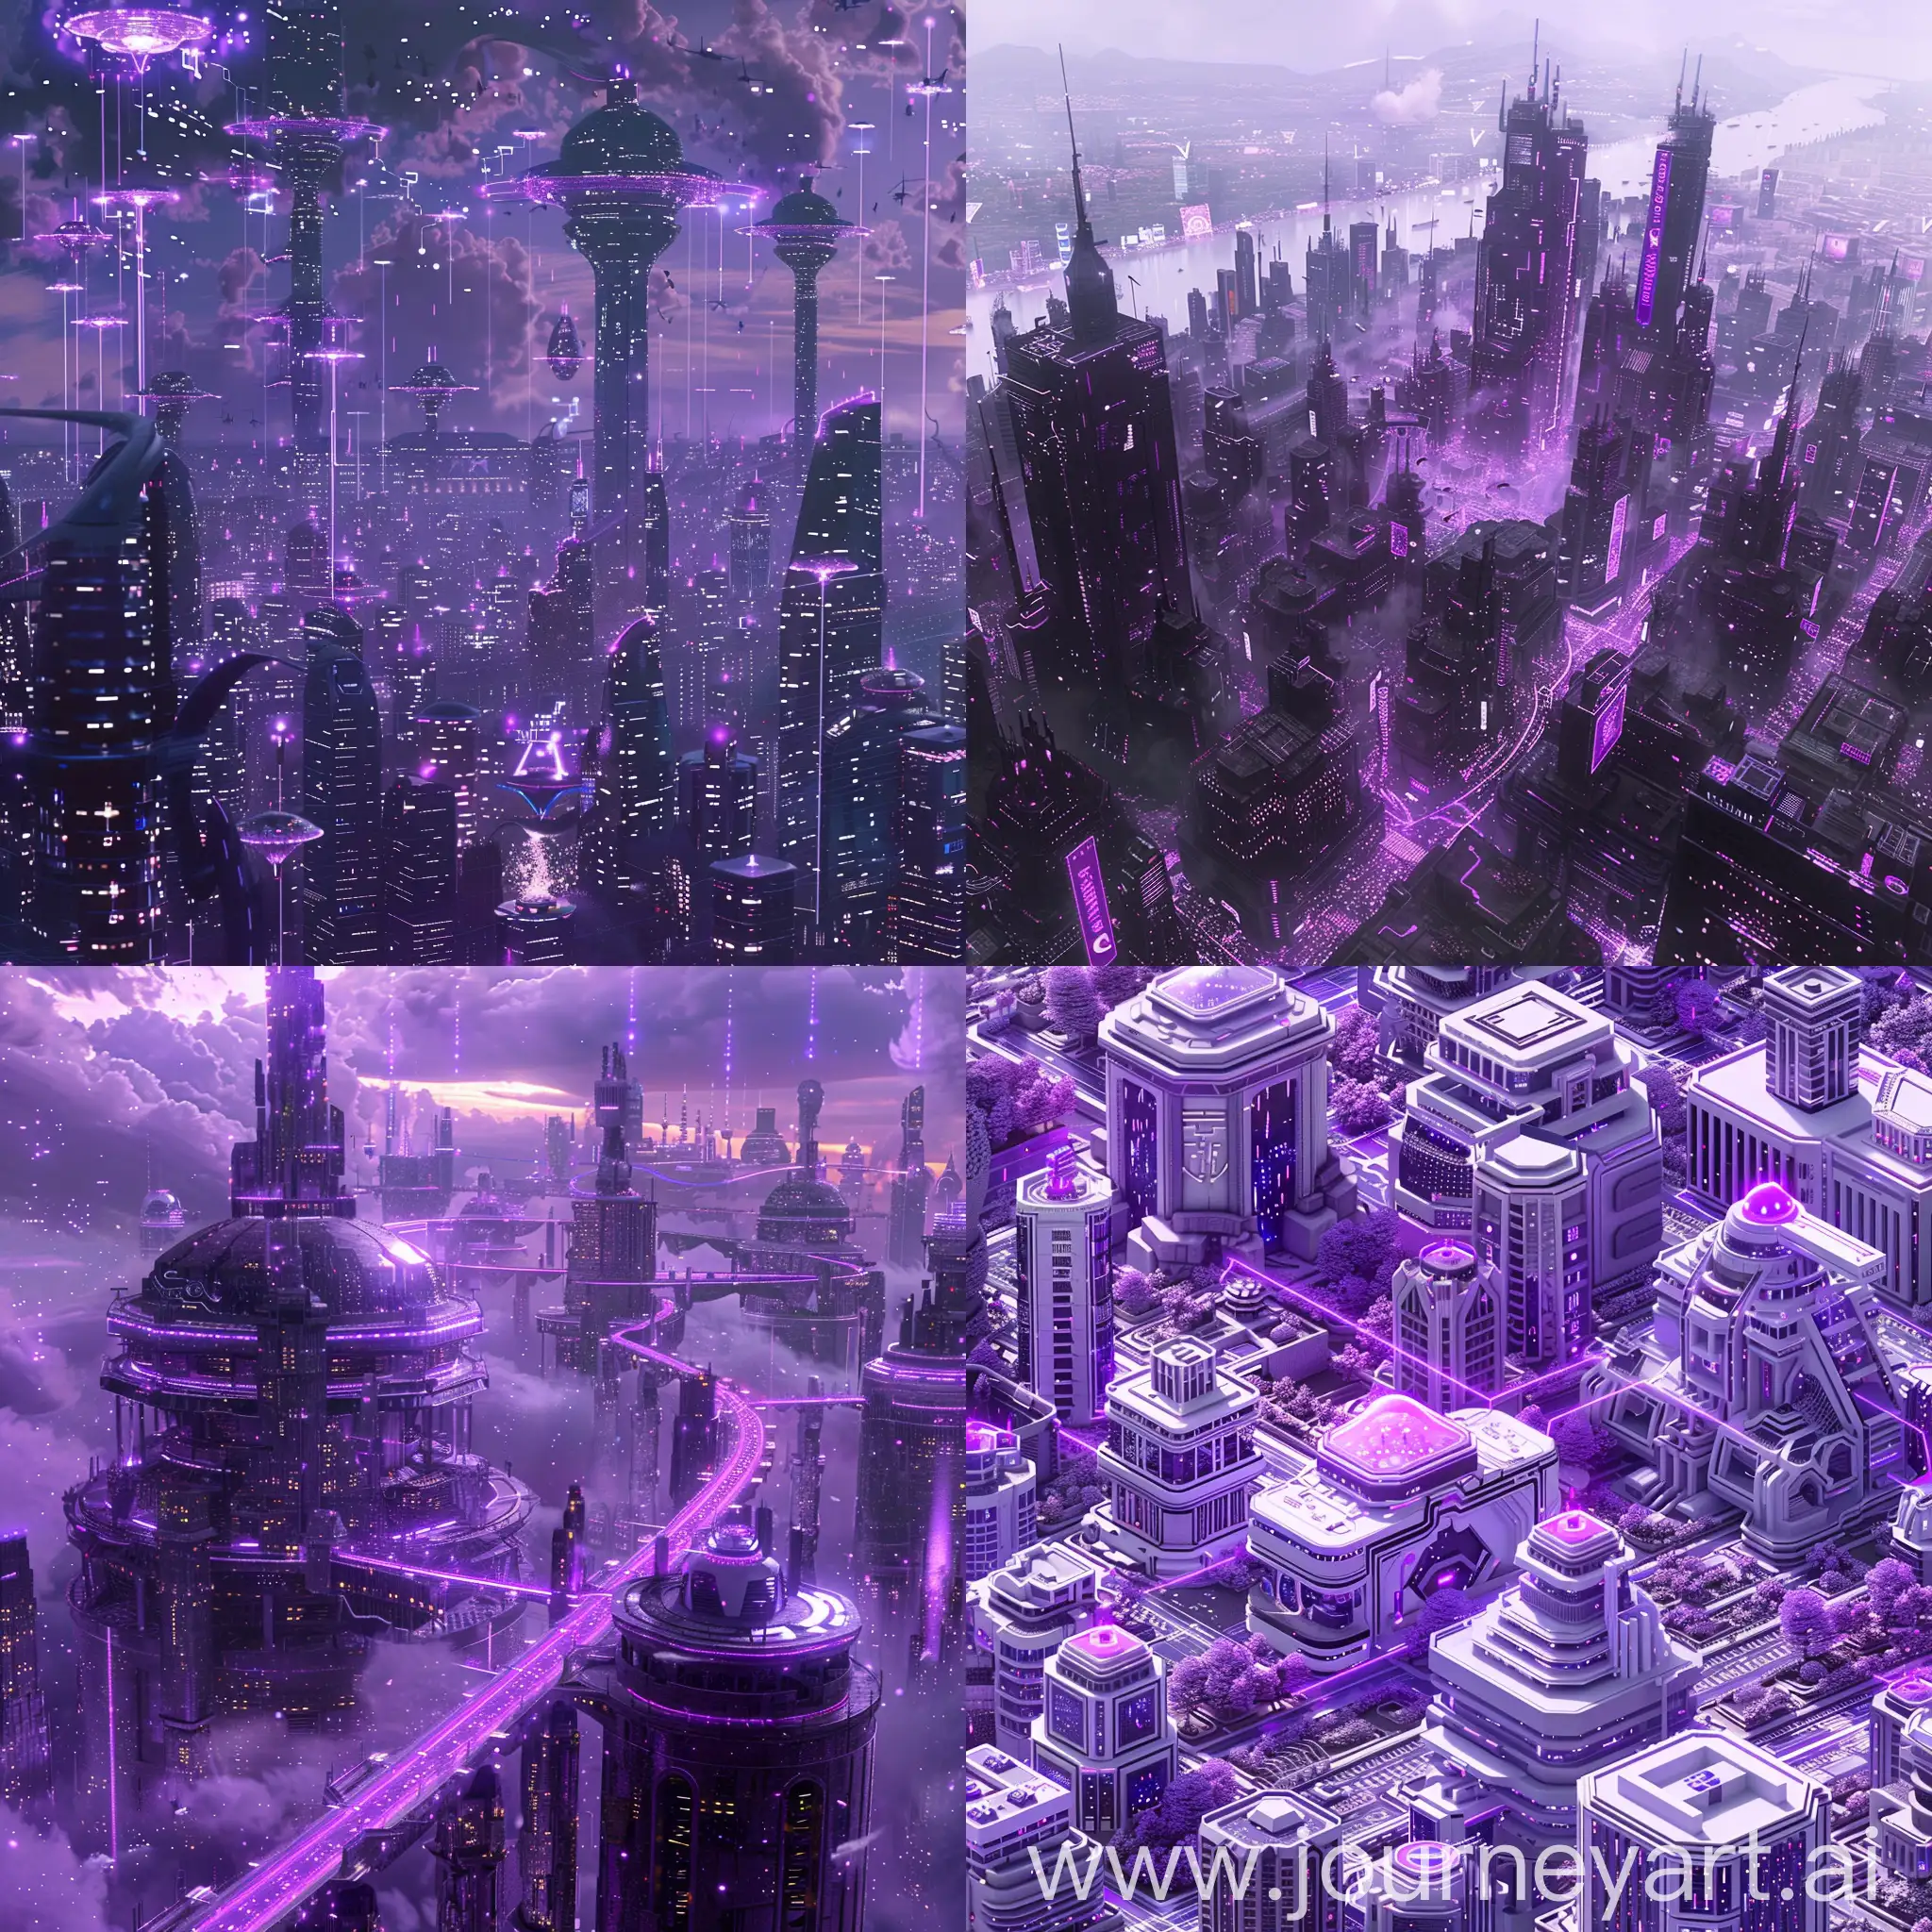 Vibrant-Purple-Networked-Cityscape-Connected-Urban-Hub